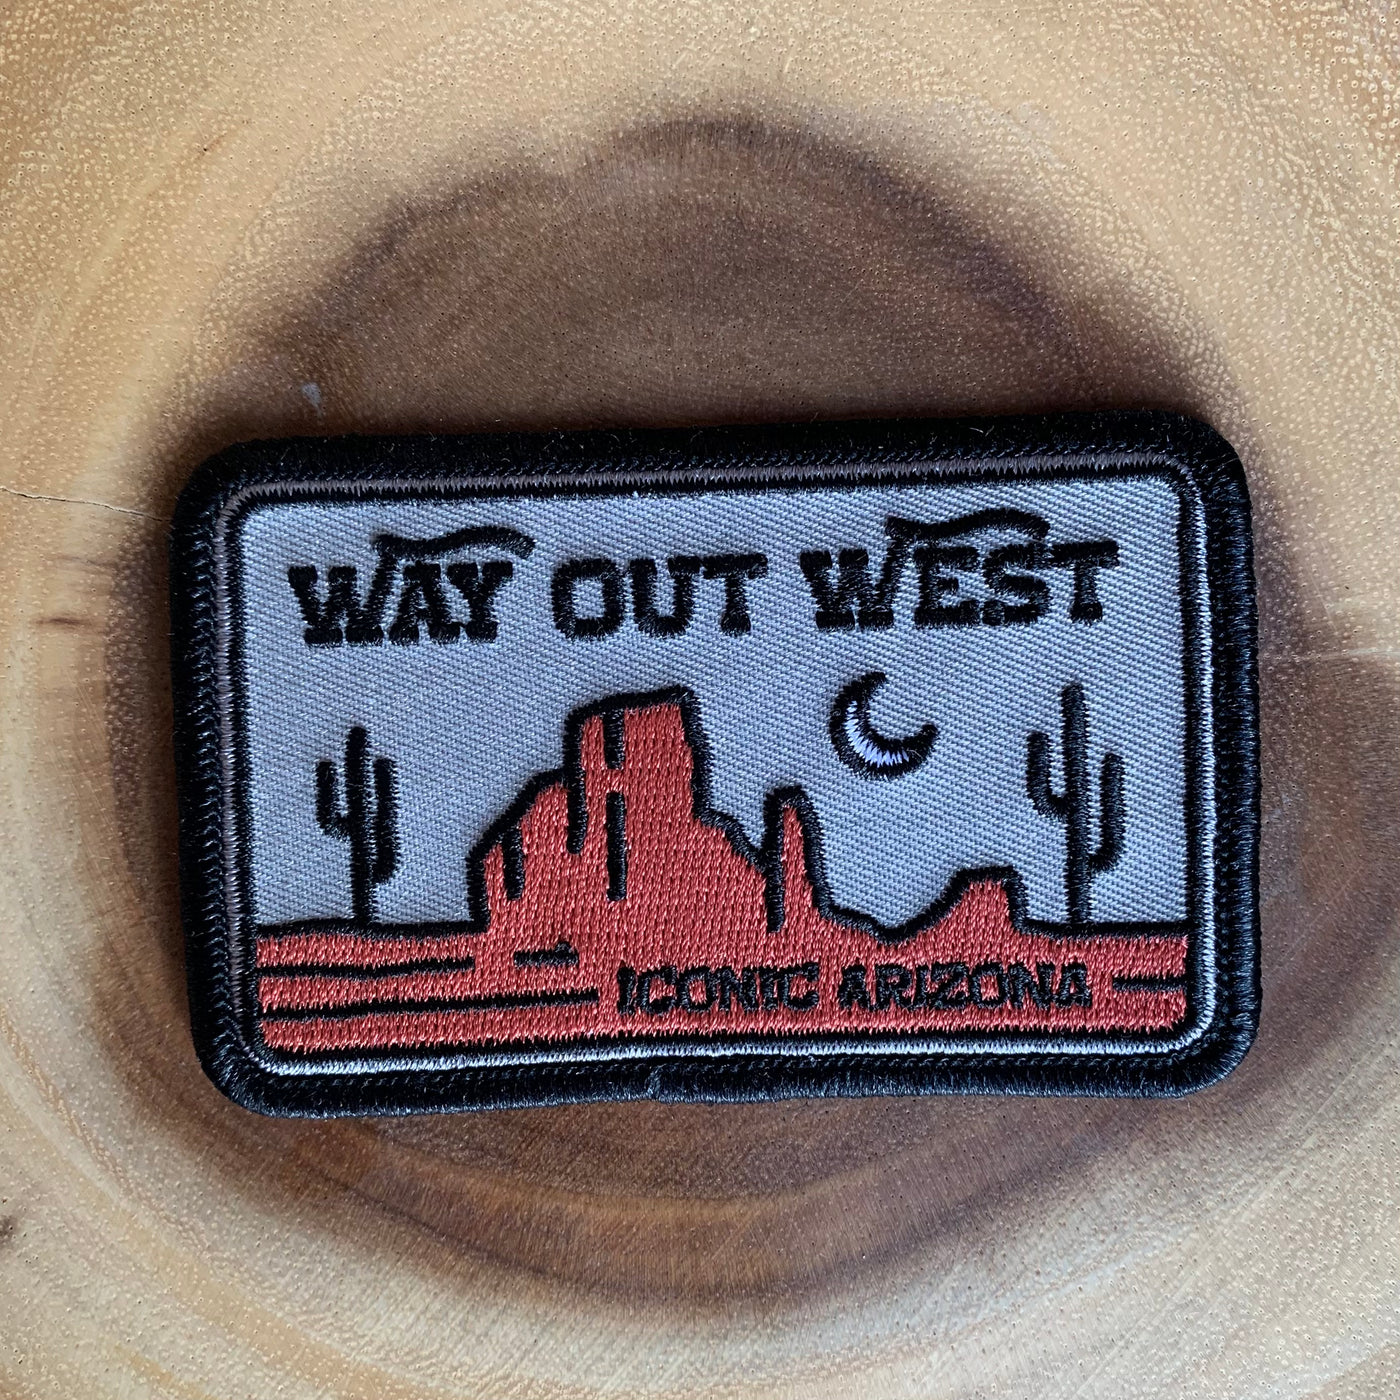 Way Out West Patch